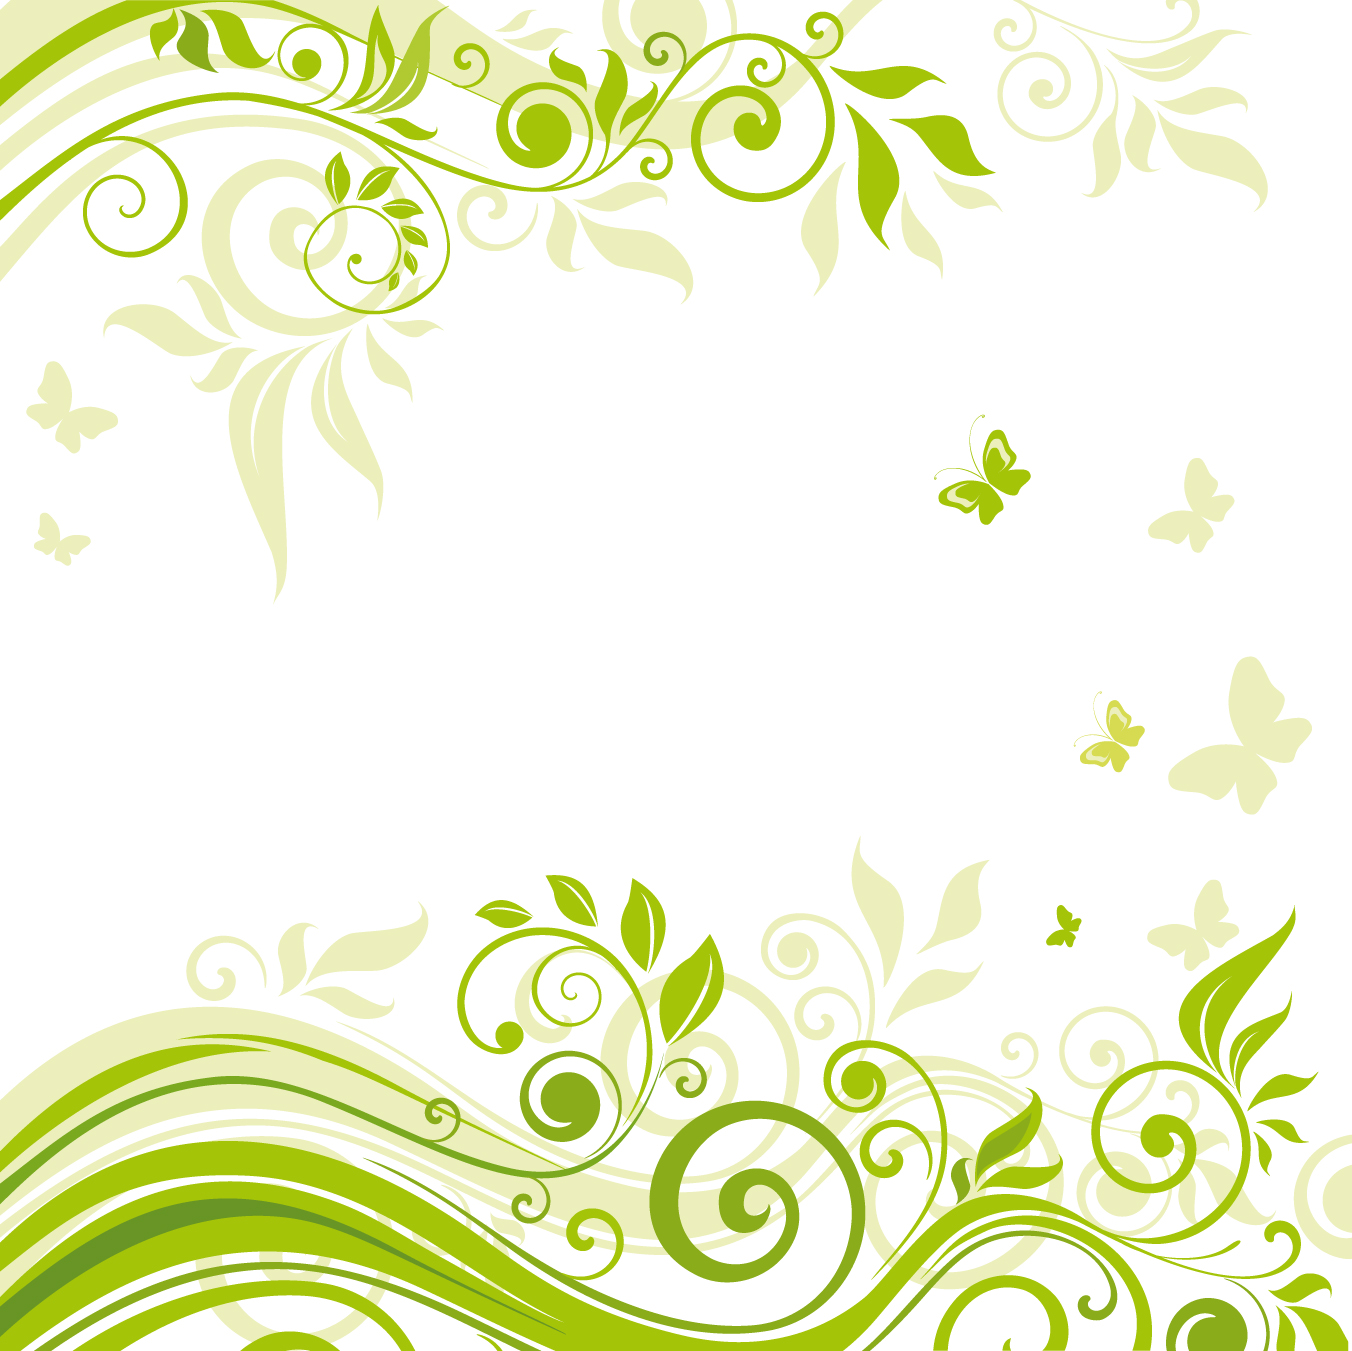 Beautiful flowers illustration background 02 vector Free Vector 